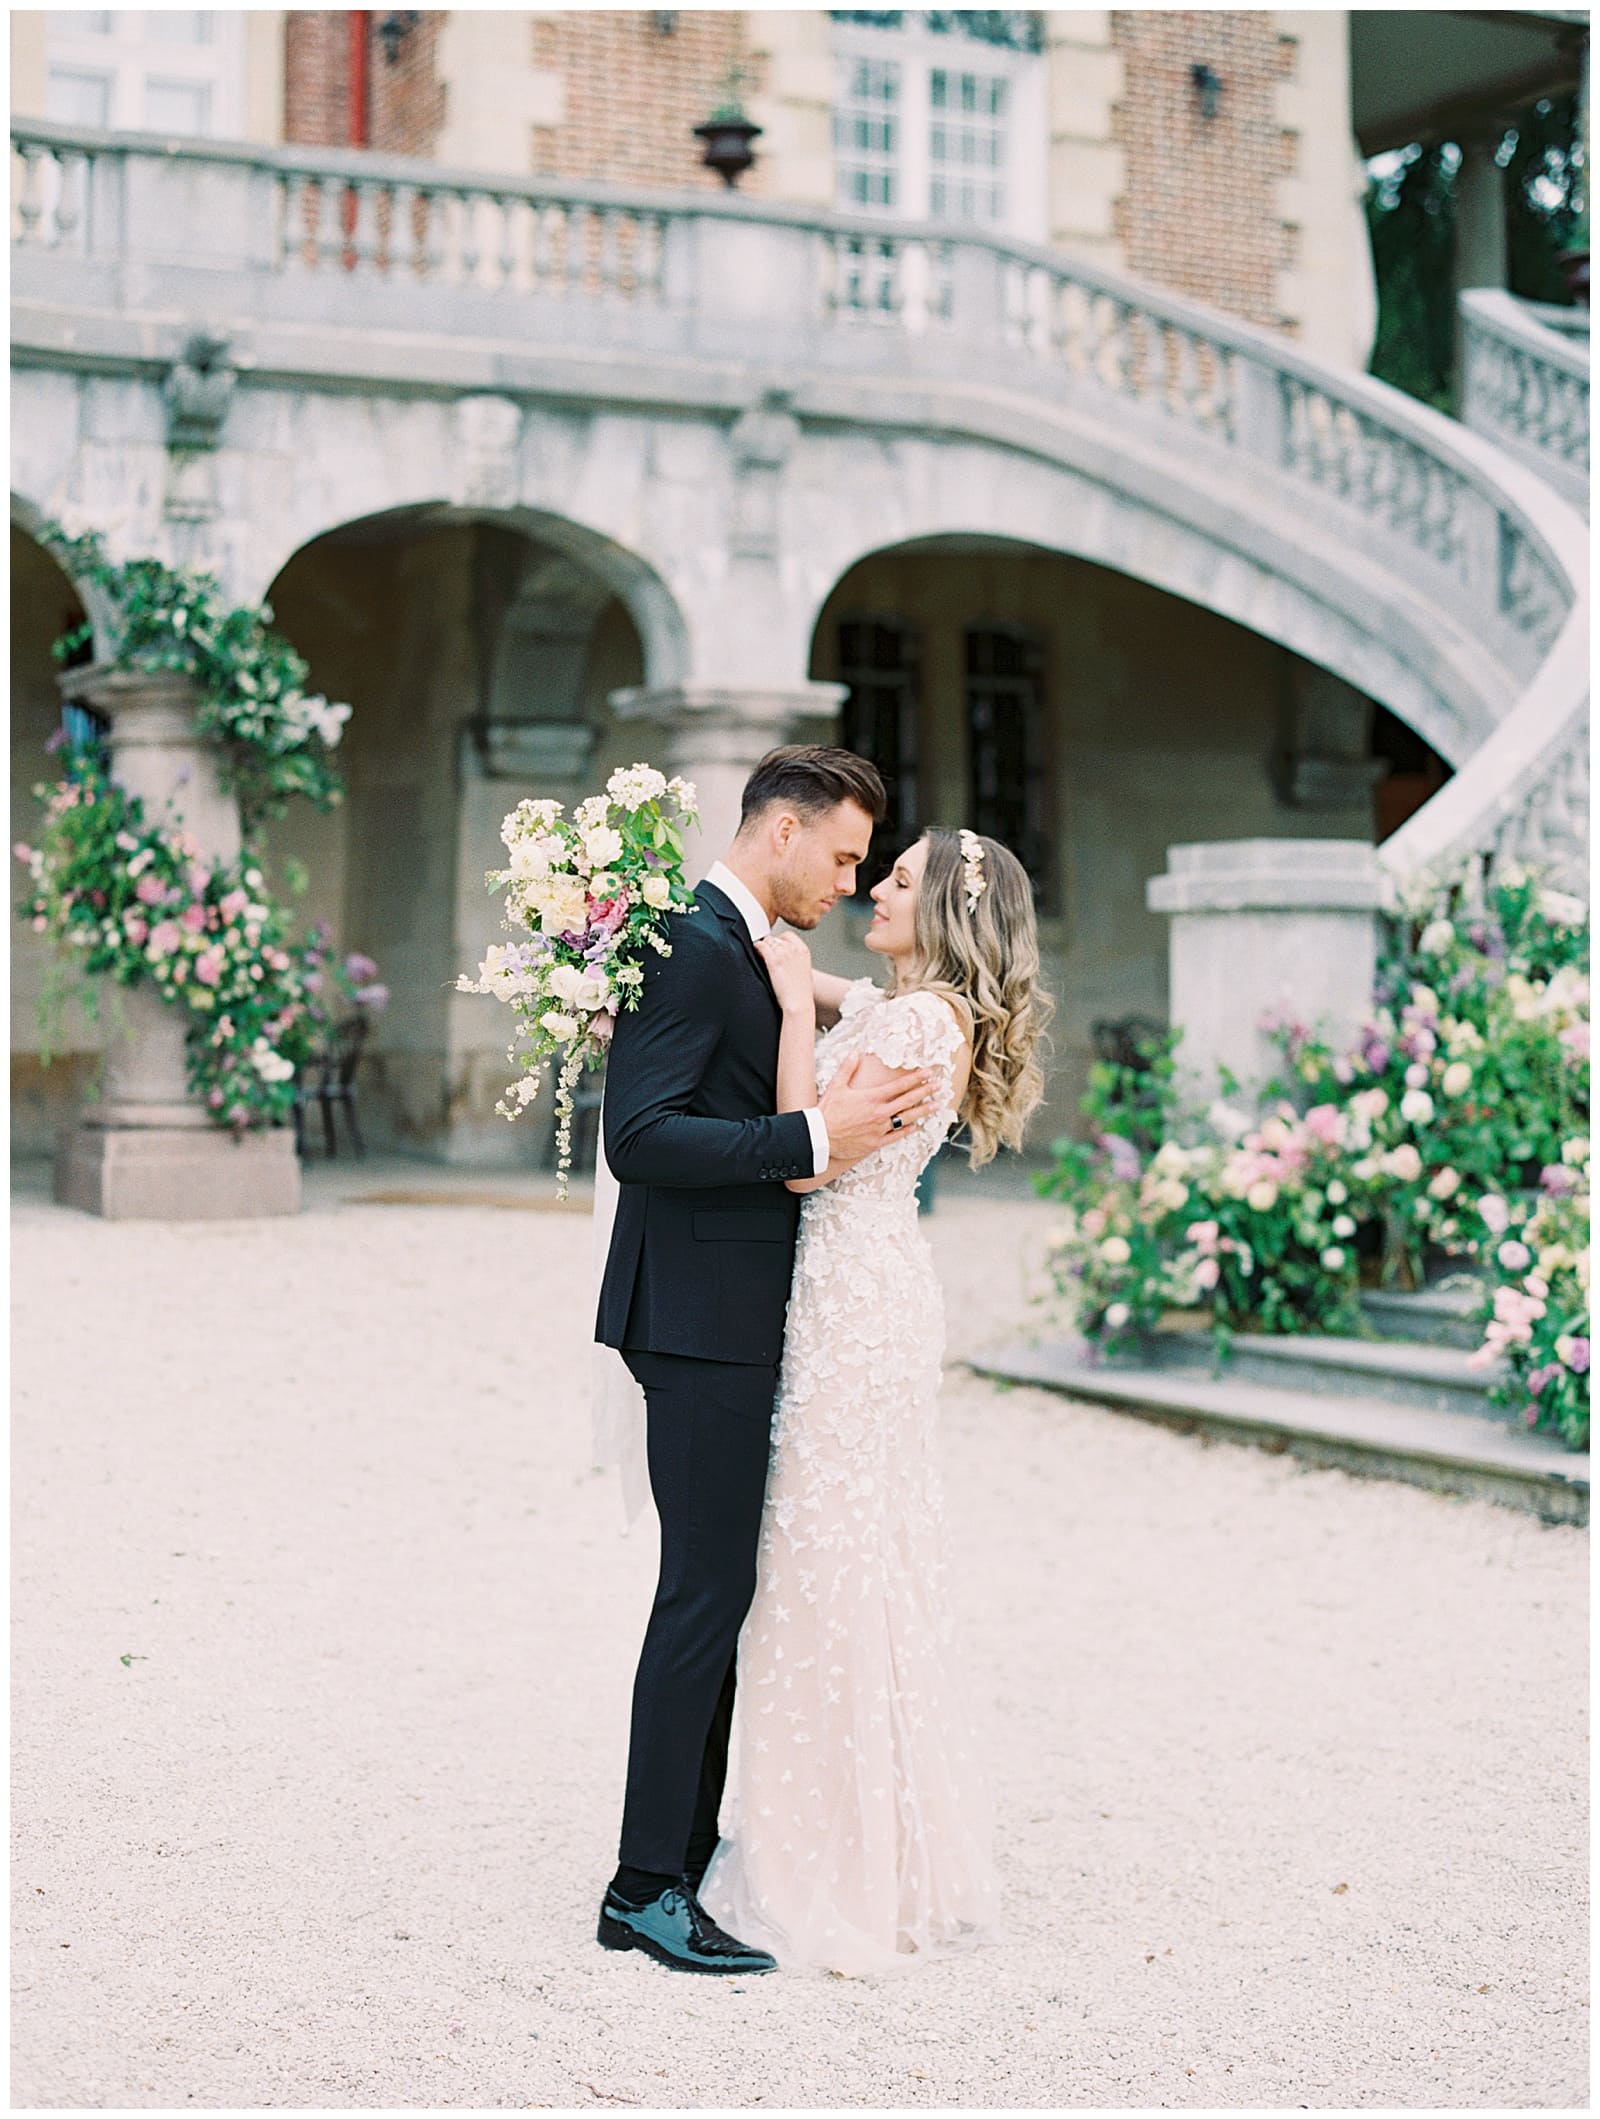 Plan the perfect Chateau Bouffemont Wedding (50+ photos!)